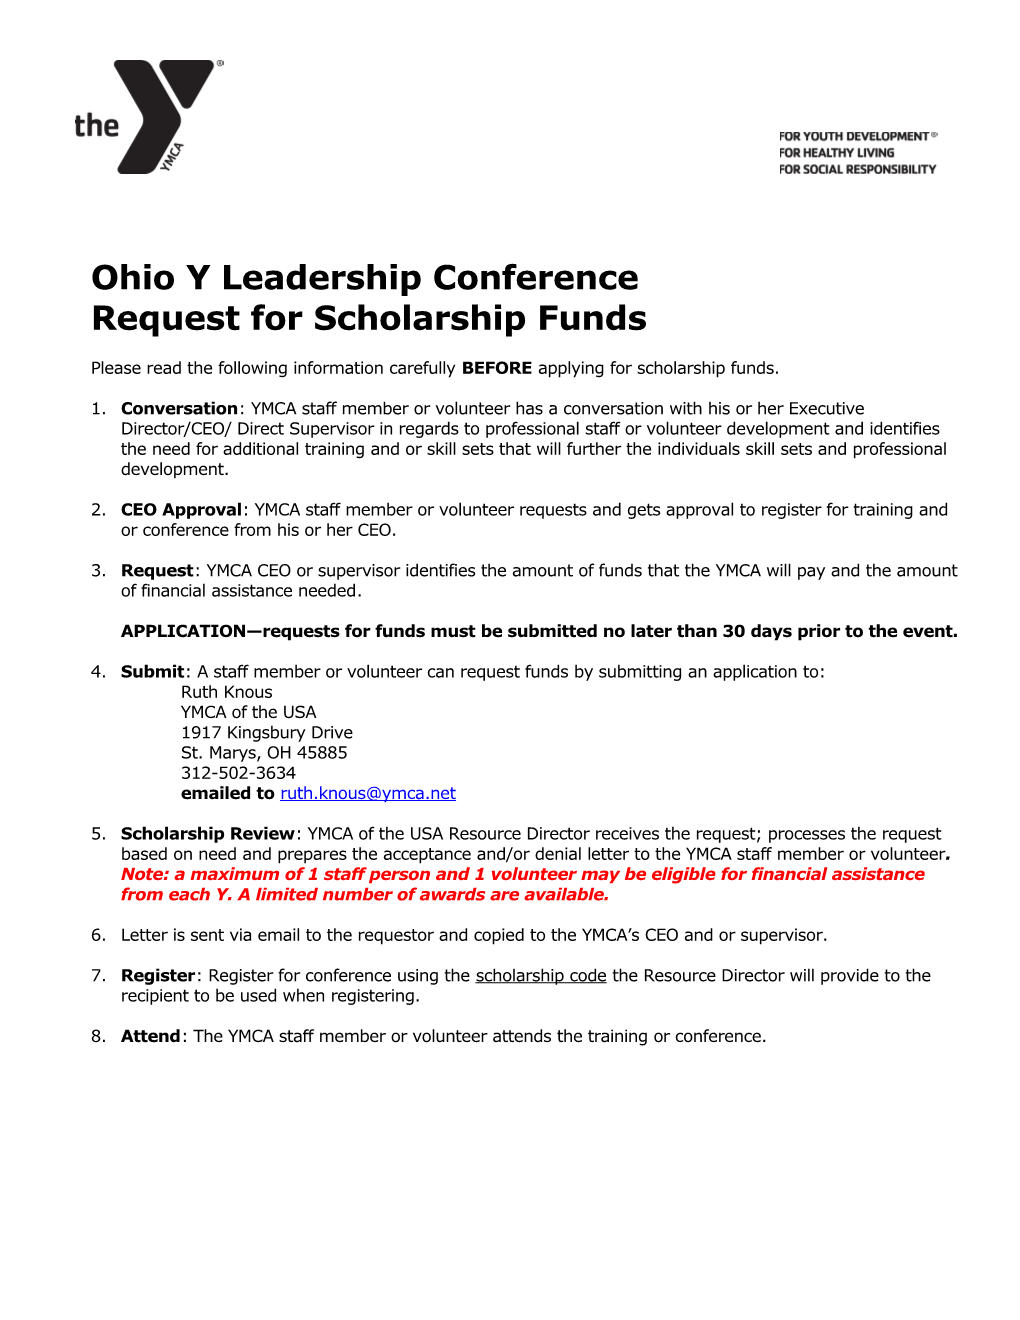 Request for Scholarship Funds